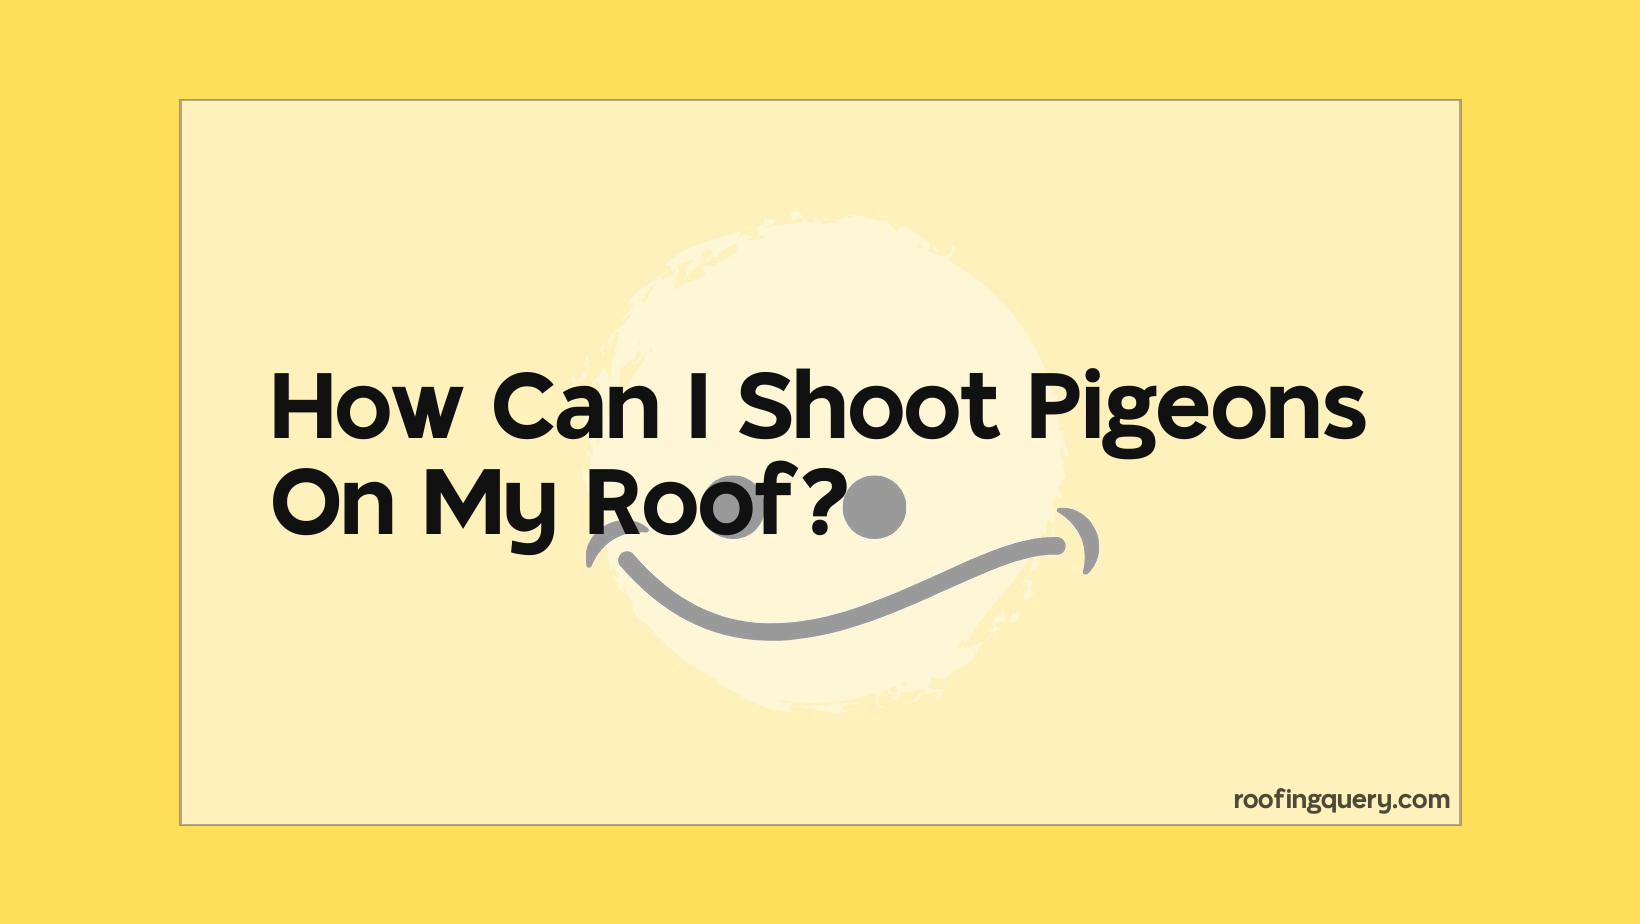 How Can I Shoot Pigeons On My Roof?